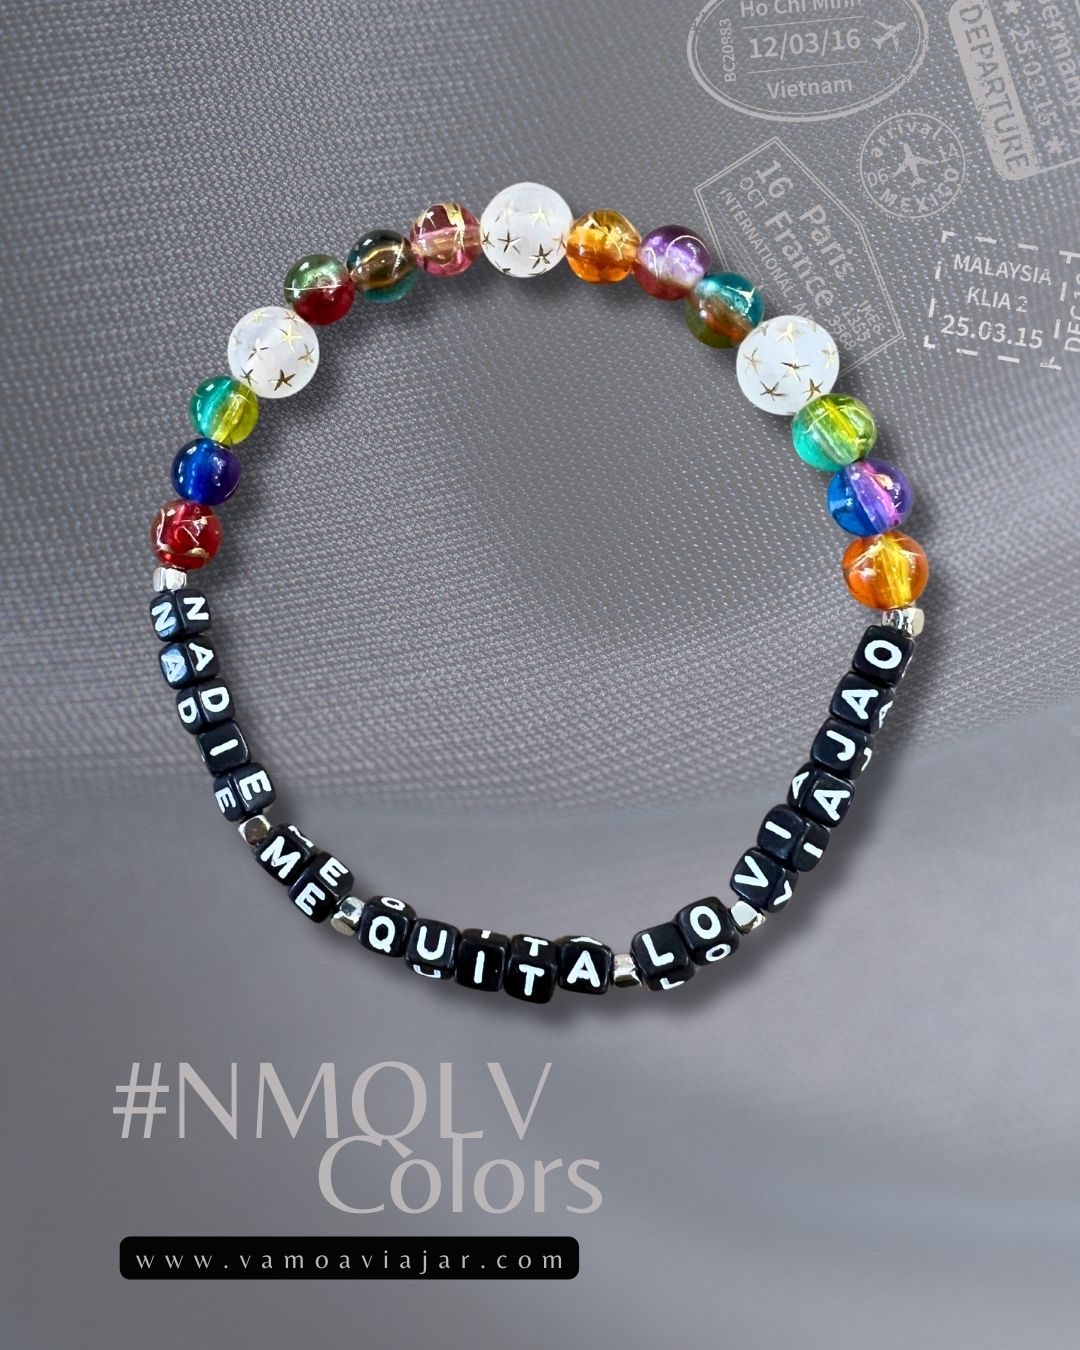 #NMQLV Colors